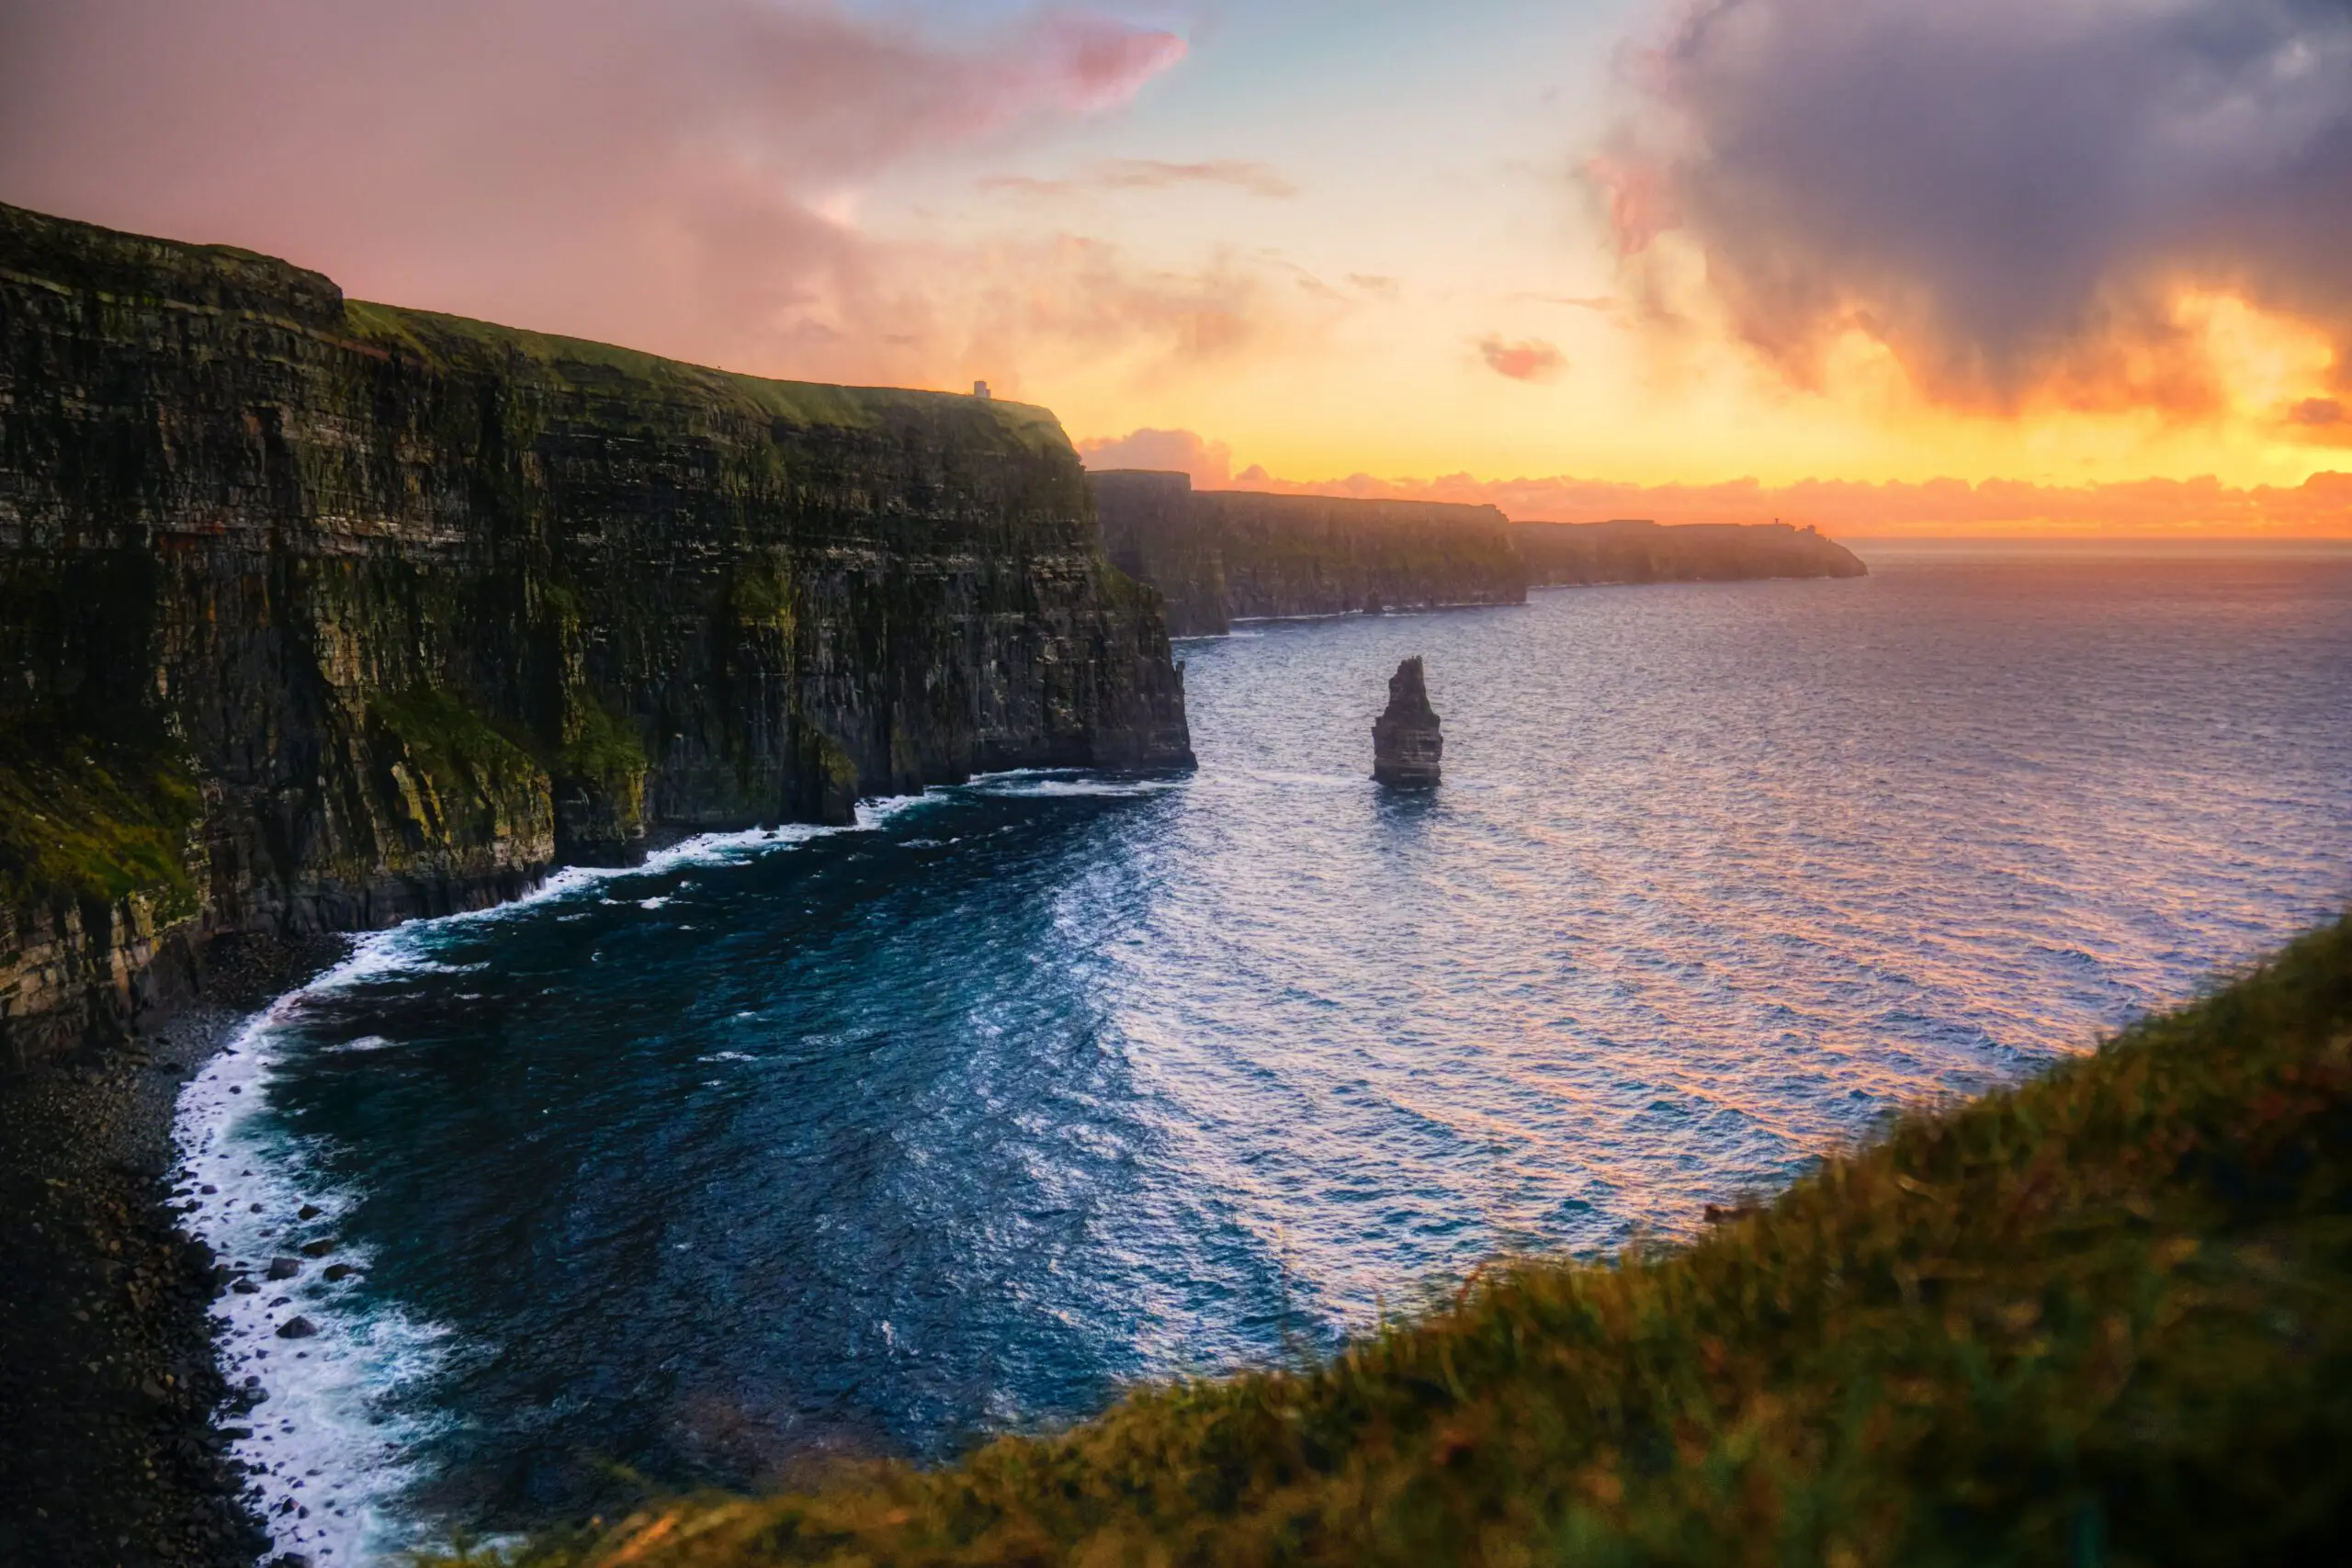 What are the Cliffs of Moher?